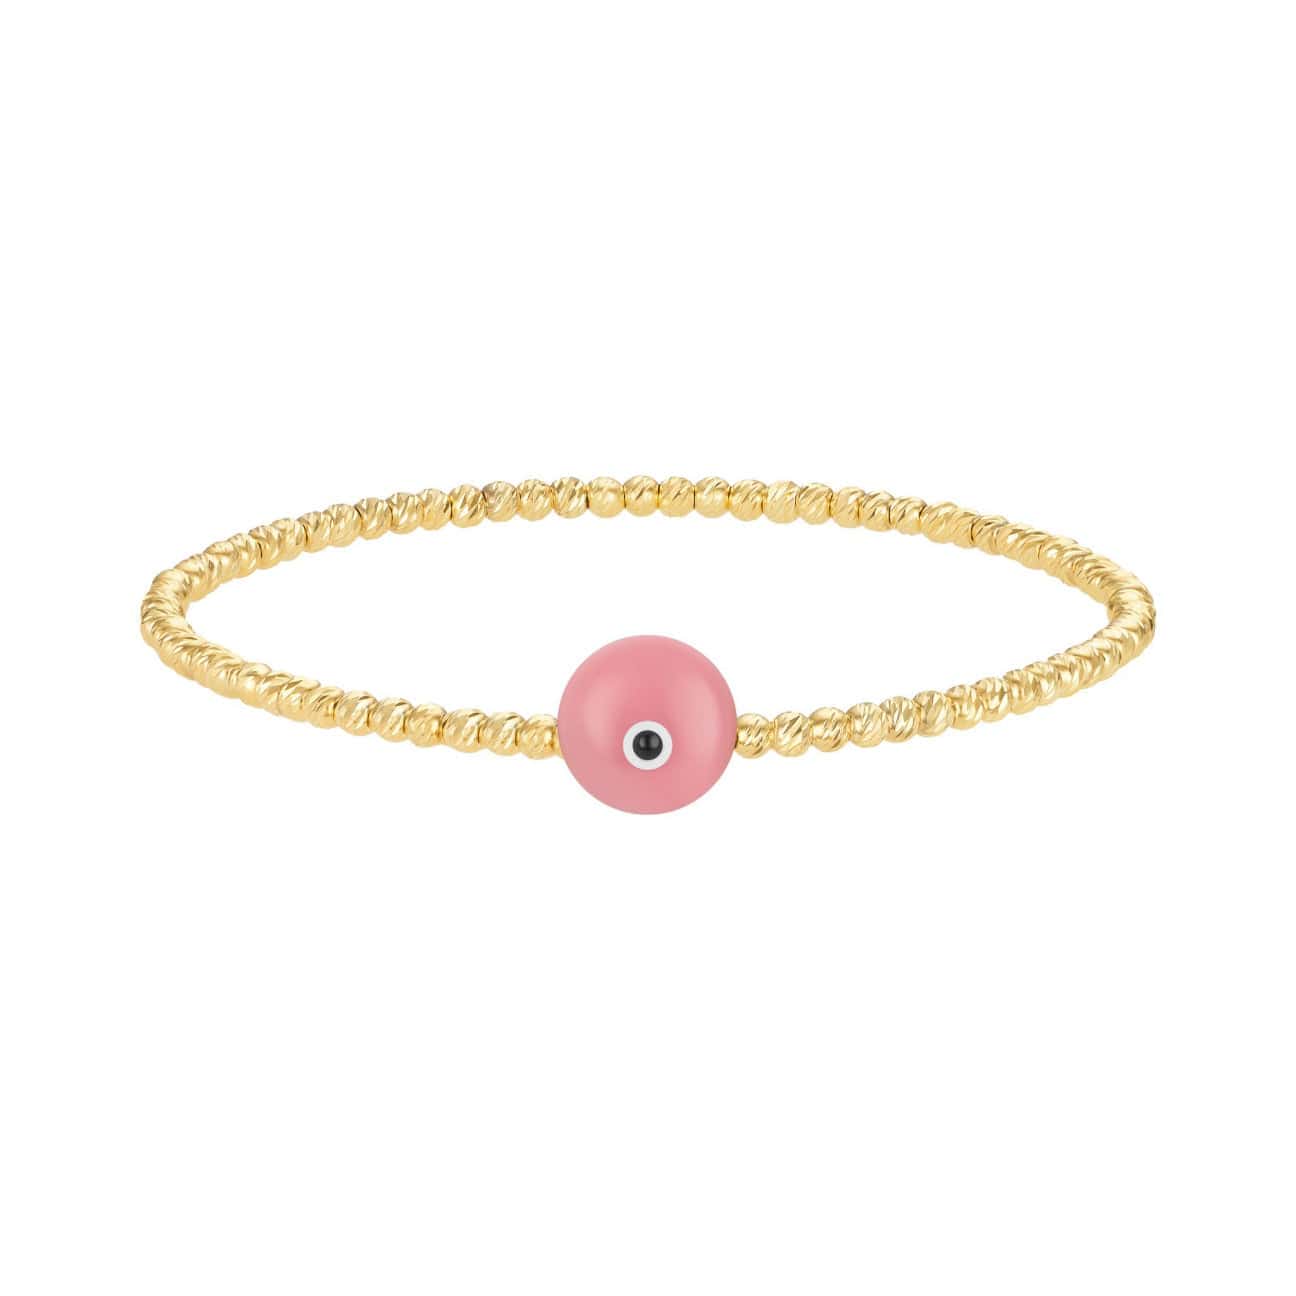 Bead Bracelet with Majestic Evil Eye - Yellow Gold and Pink - Golden Tangerine